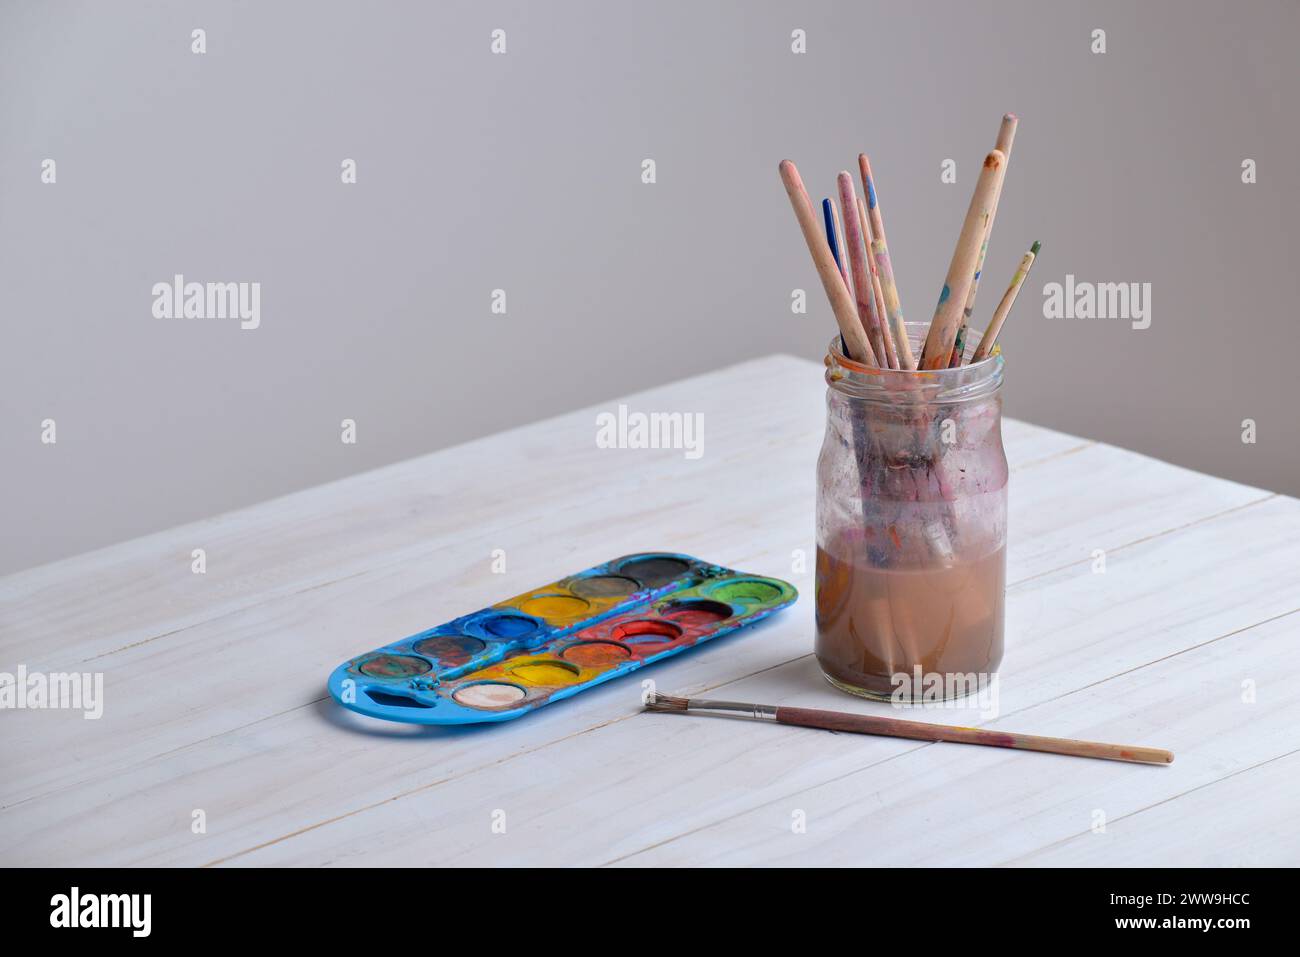 Jar with paintbrushes on work table with watercolors. Copy space aside. Ideal for art supplies, creativity, or painting concepts Stock Photo